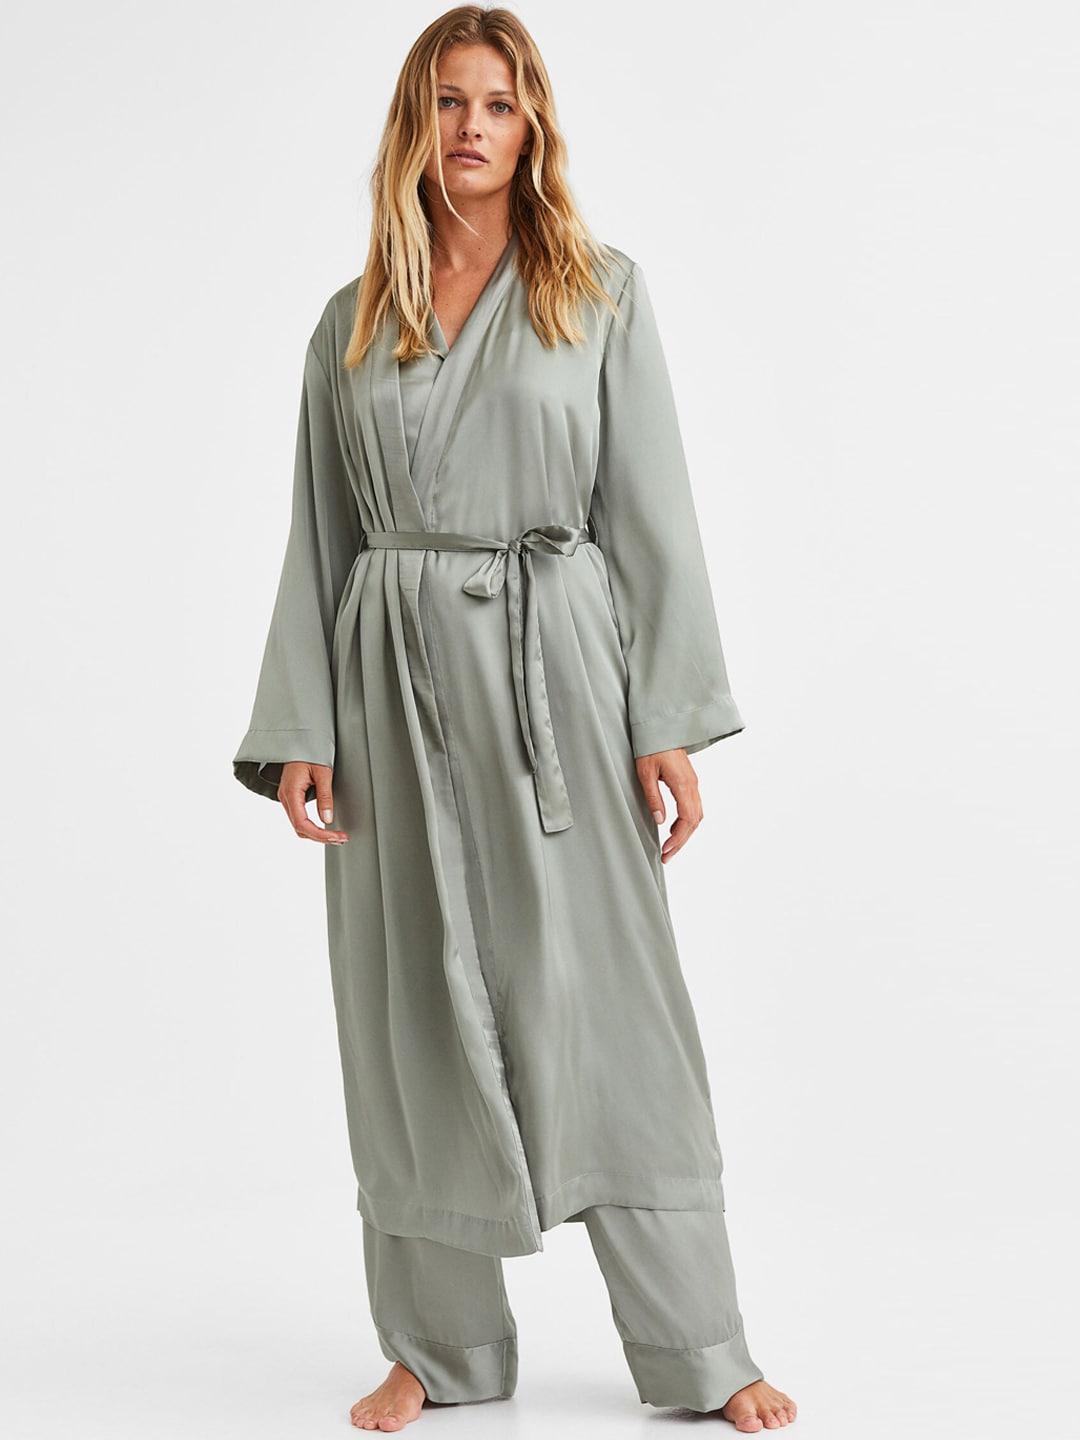 H&M Satin Dressing Gown